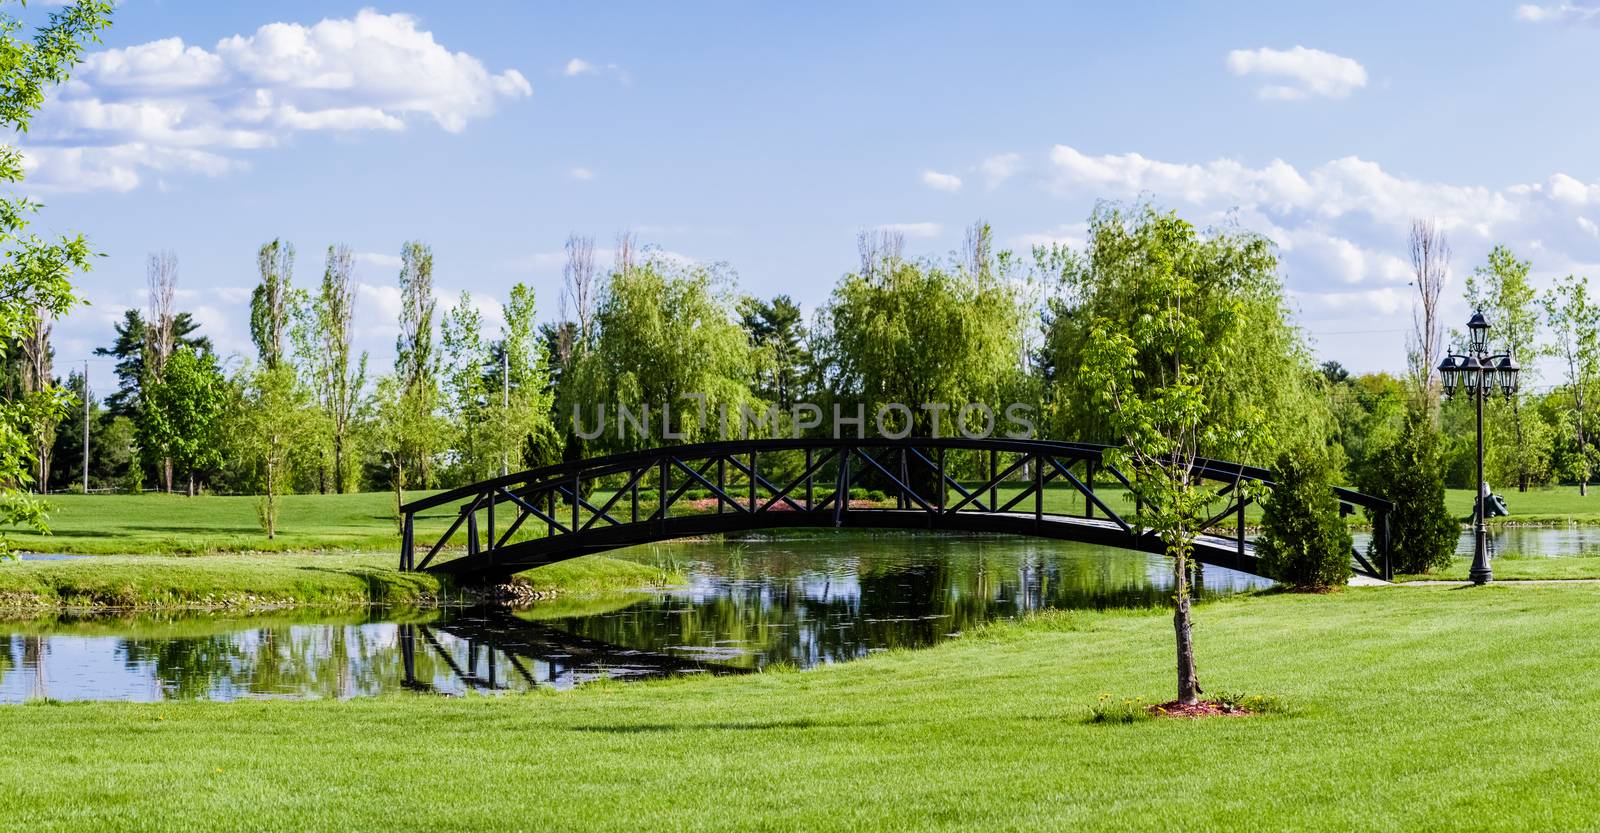 Little Bridge Over a Pond by aetb